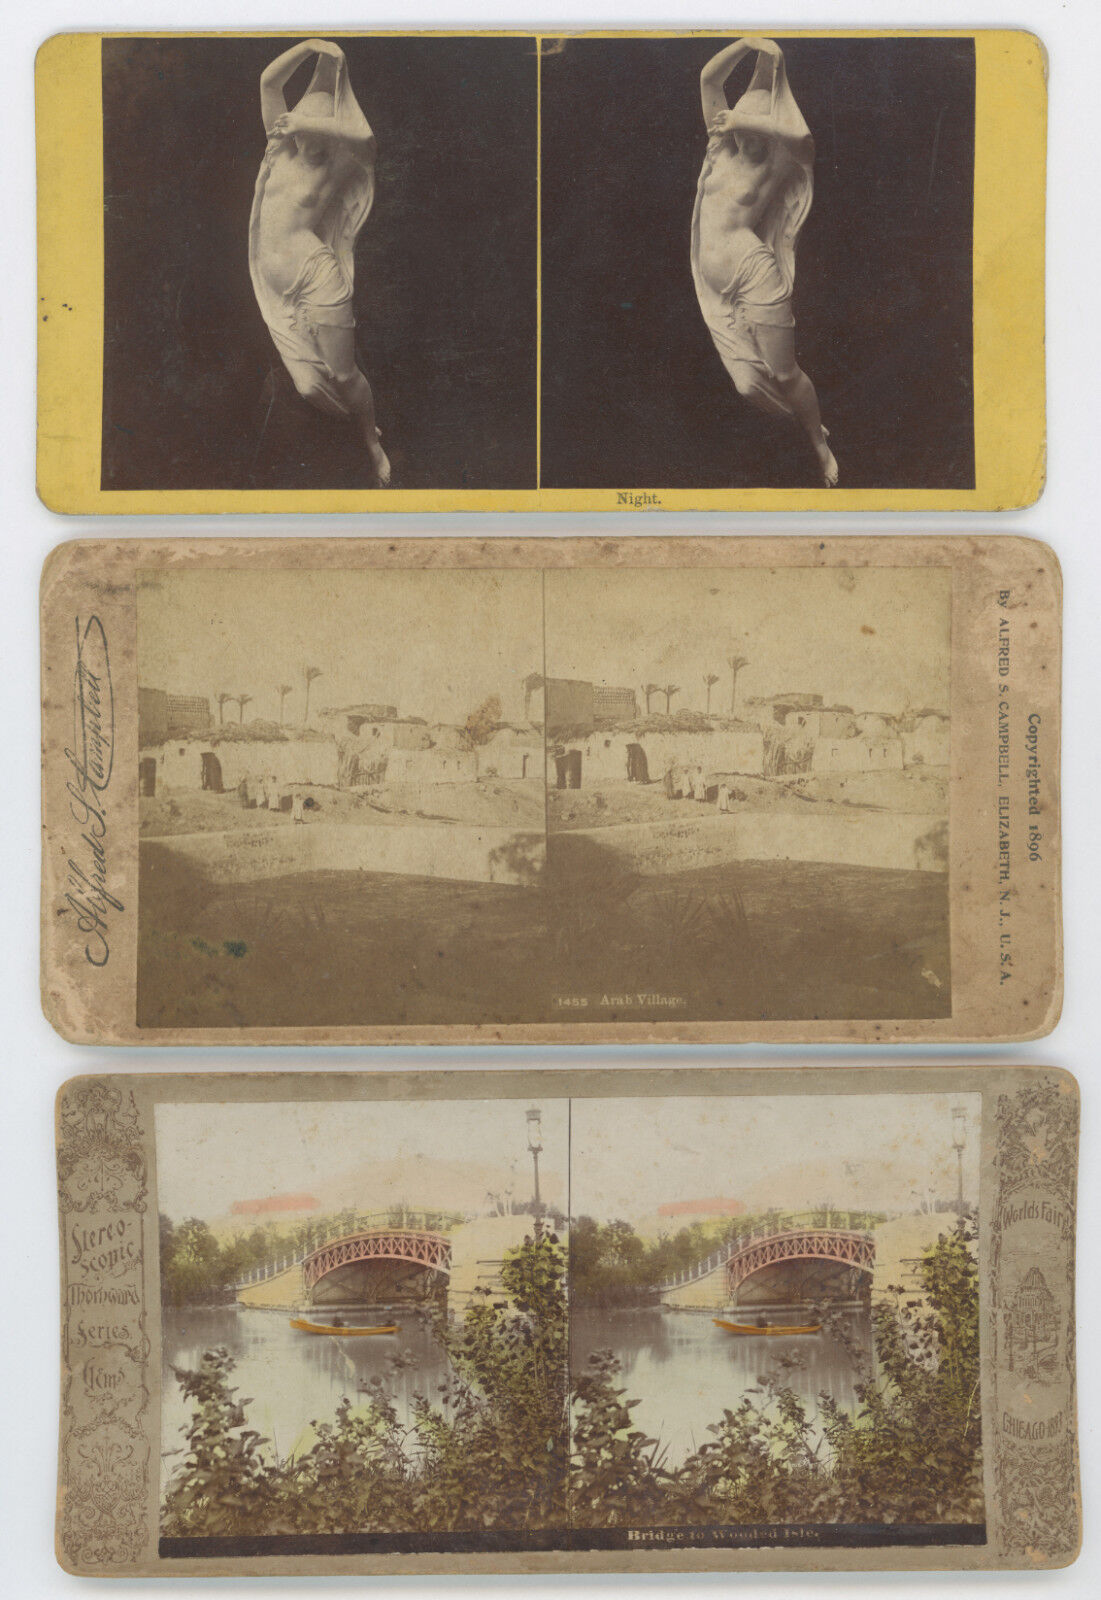 24 STEREOVIEWS 1870’s-1910, LANDSCAPES, PEOPLE, BUILDINGS, Misc. Subjects